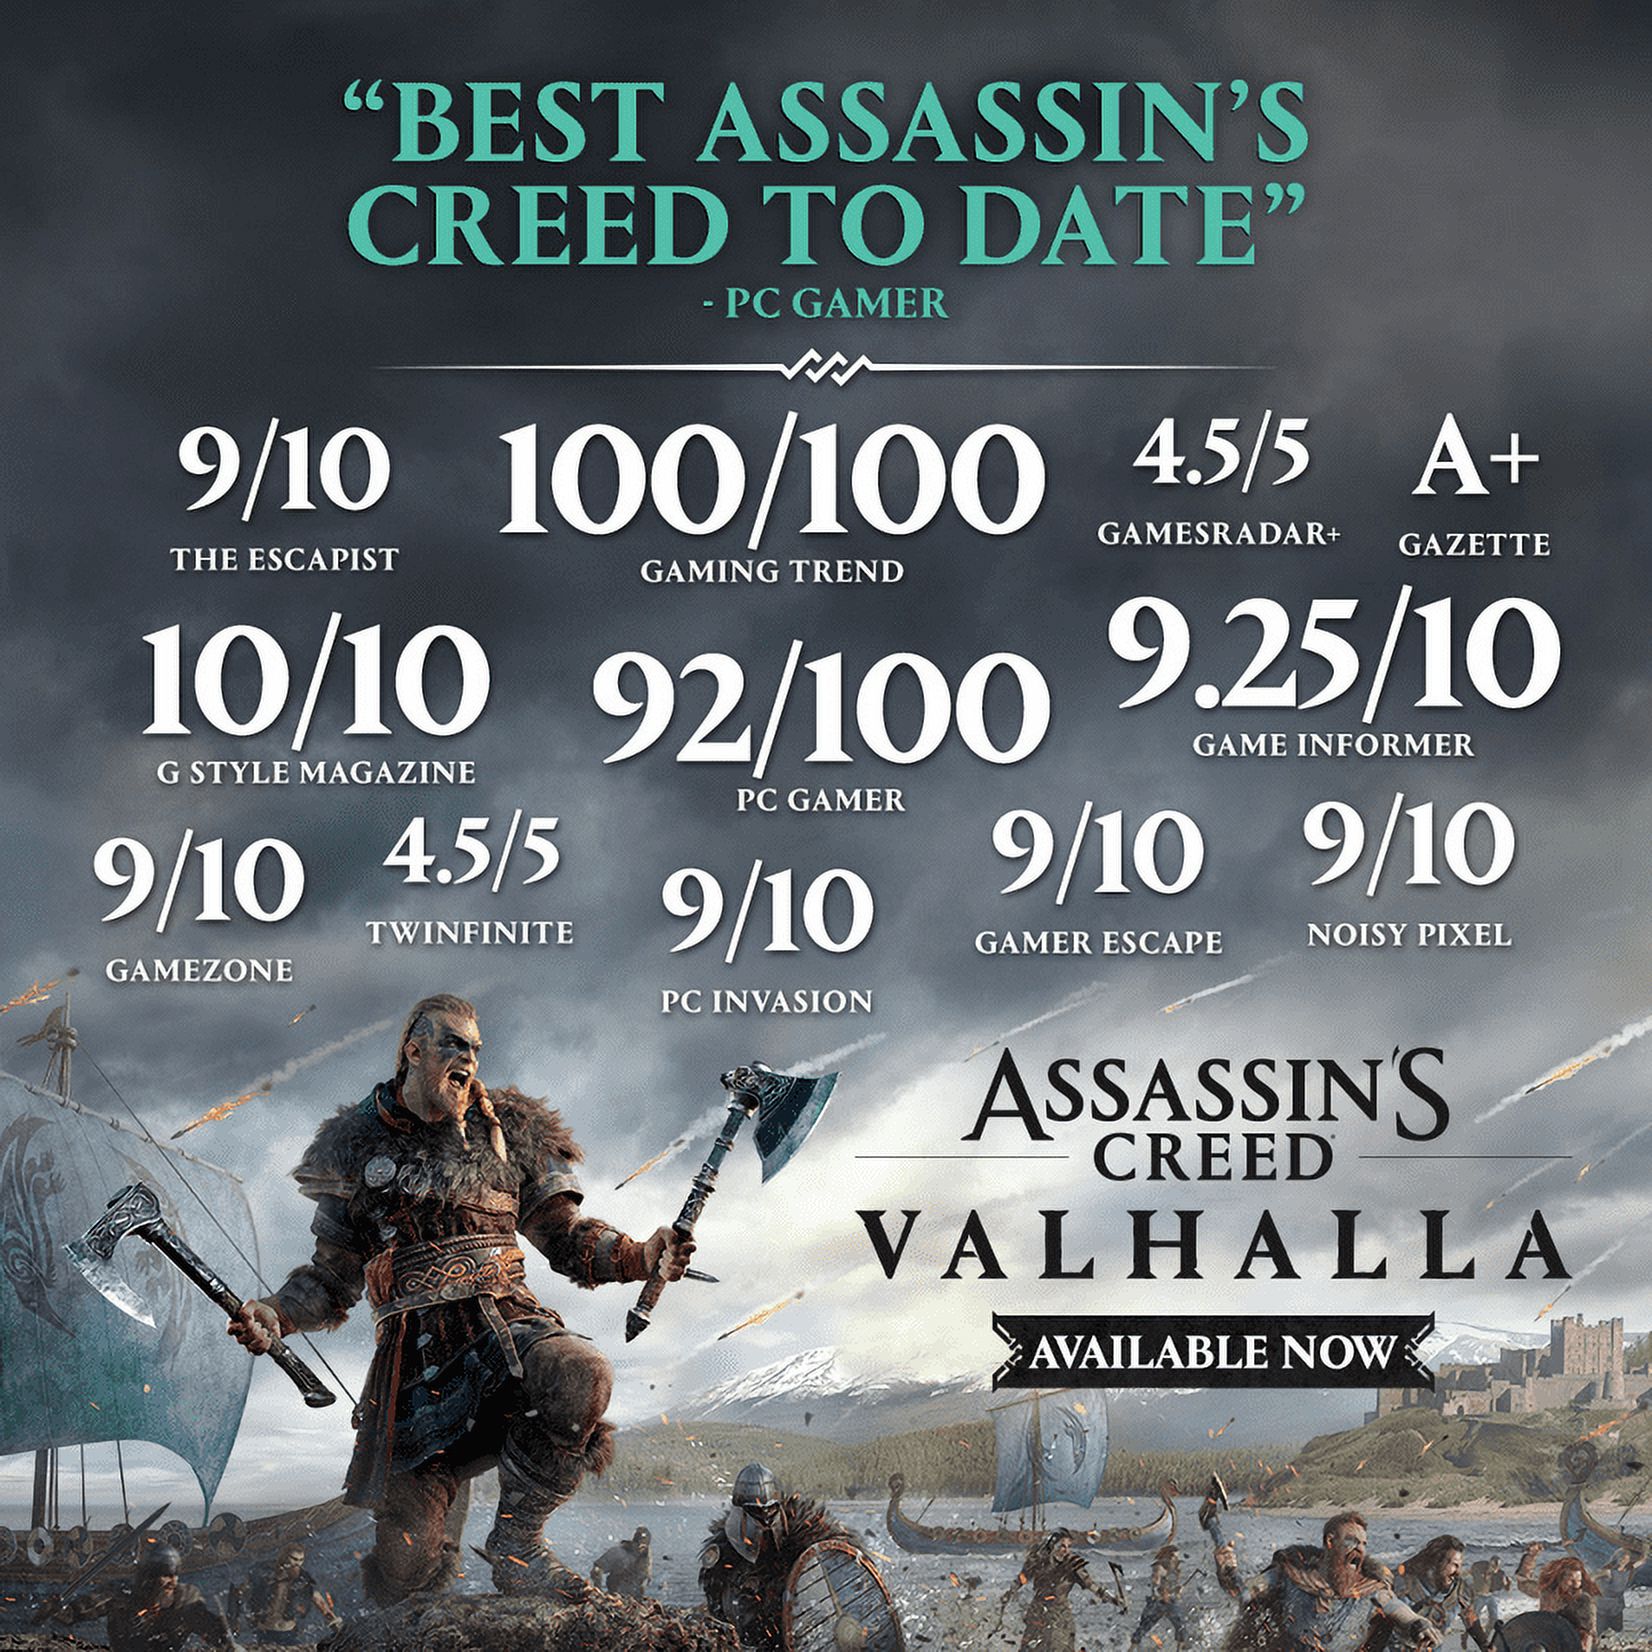 Assassin's Creed Valhalla PlayStation 4 Standard Edition with free upgrade to the digital PS5 version - image 5 of 6